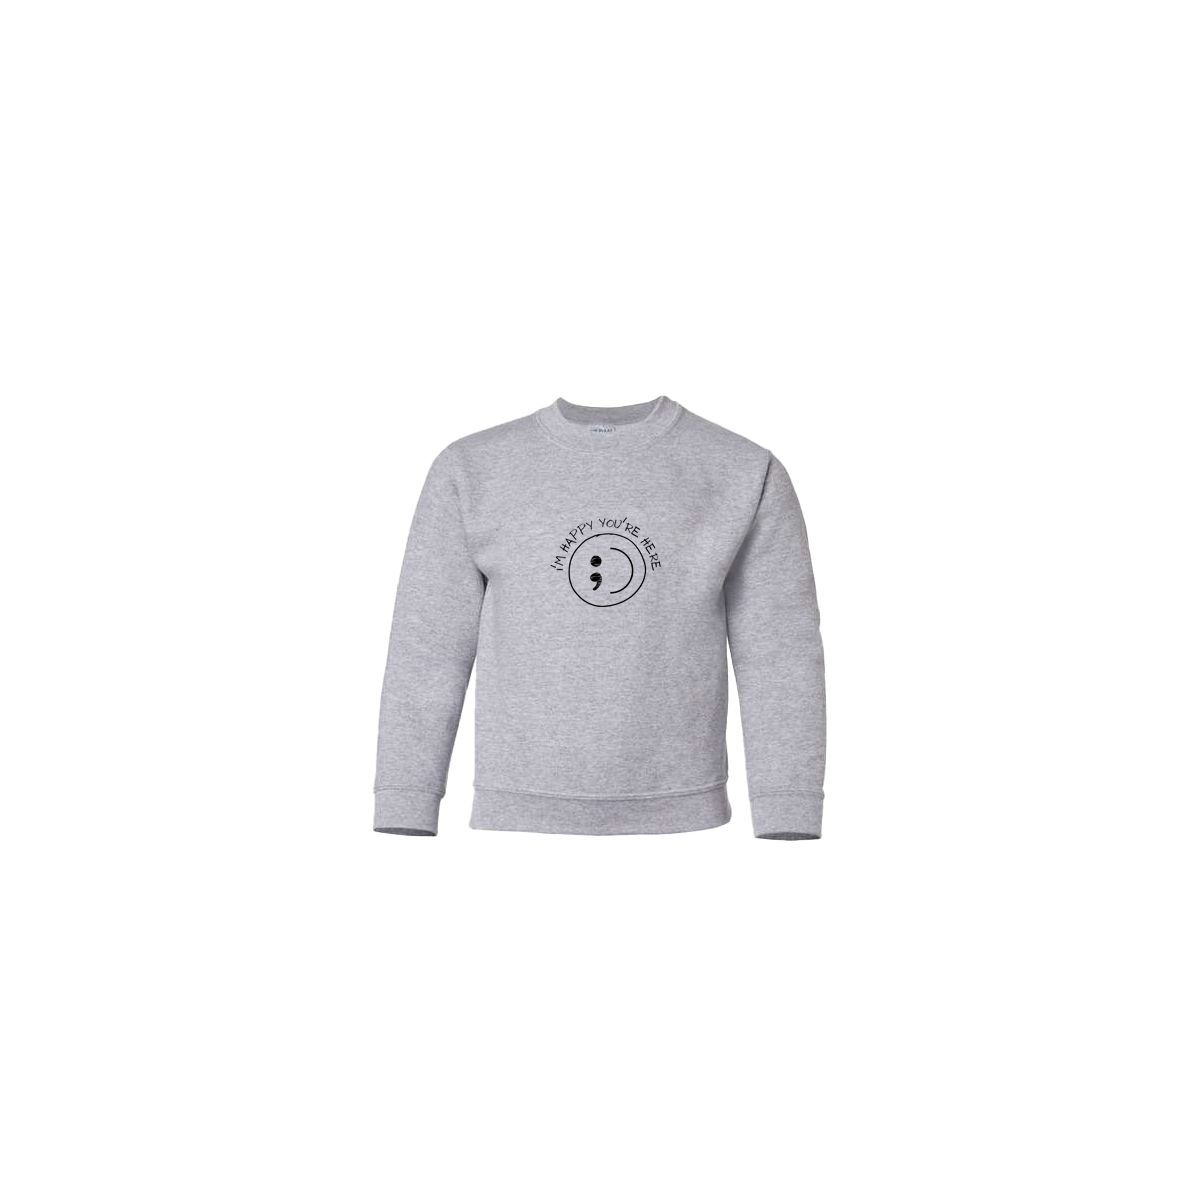 I'm Happy You're Here Embroidered Grey Youth Crewneck